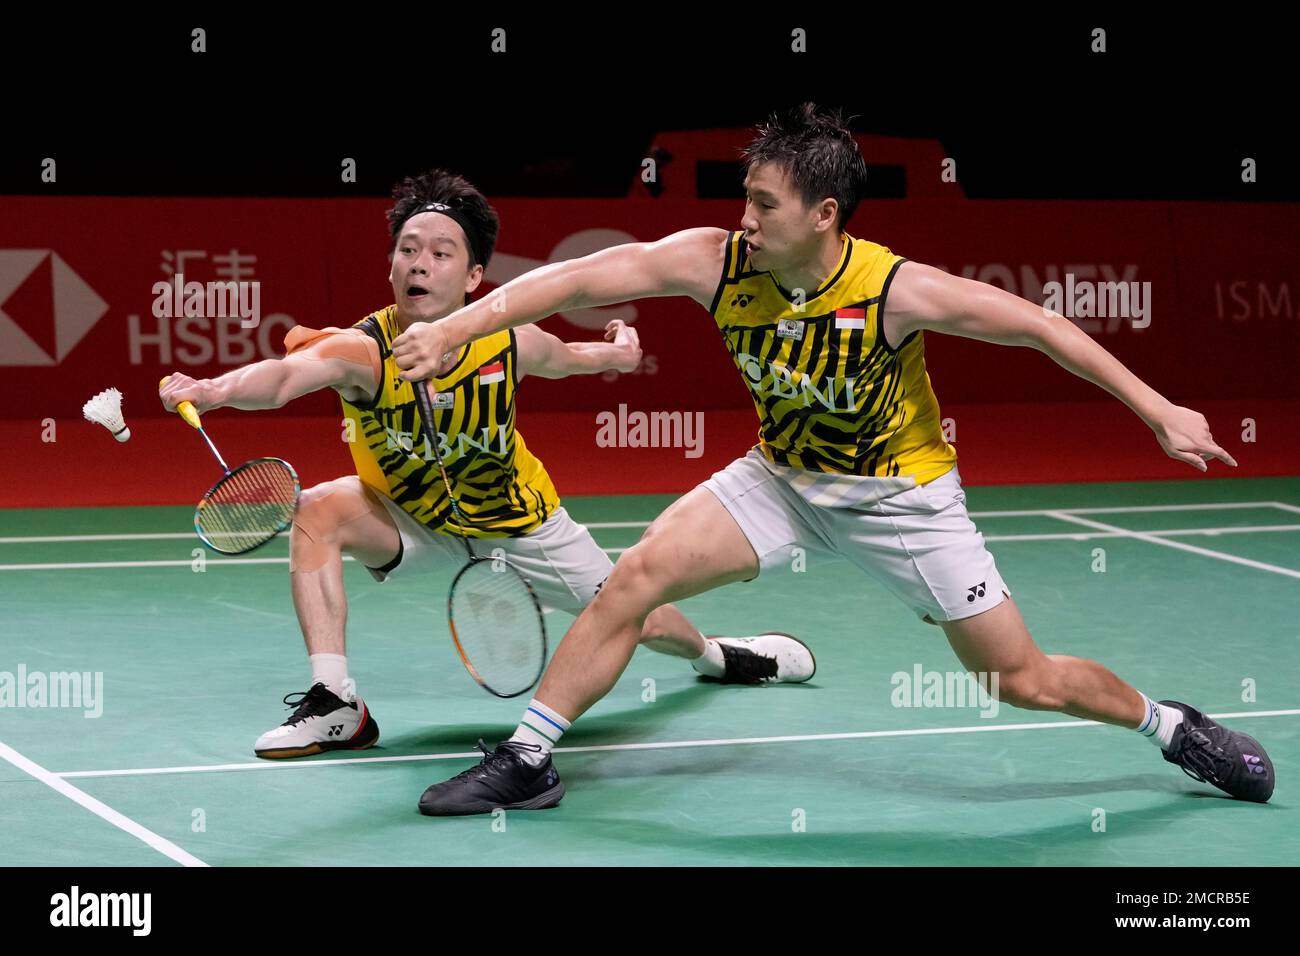 Indonesias Marcus Fernaldi Gideon, right, and Kevin Sanjaya Sukamuljo compete against Denmarks Kim Astrup and Anders Skaarup Rasmussen during their mens doubles badminton group stage match at the BWF World Tour Finals